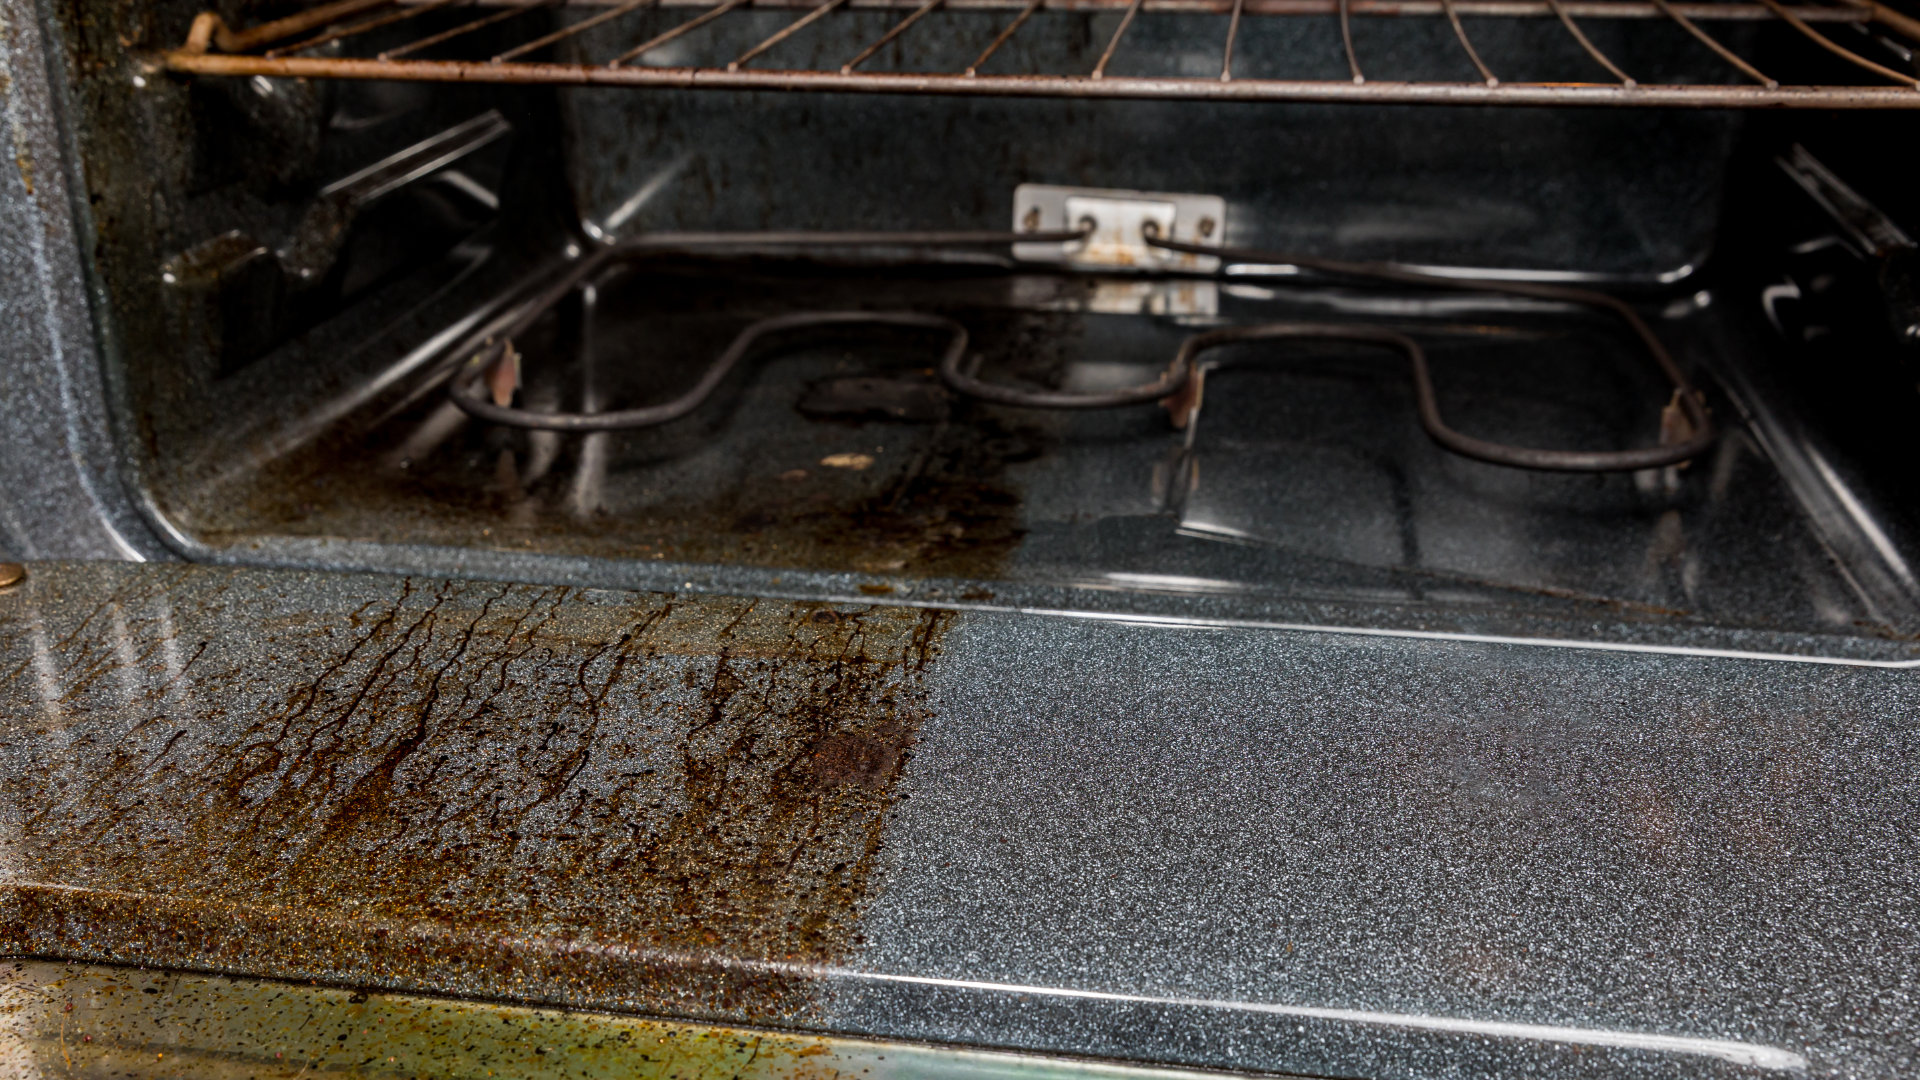 Featured image for “How to Clean a Self-Cleaning Oven in 6 Steps”